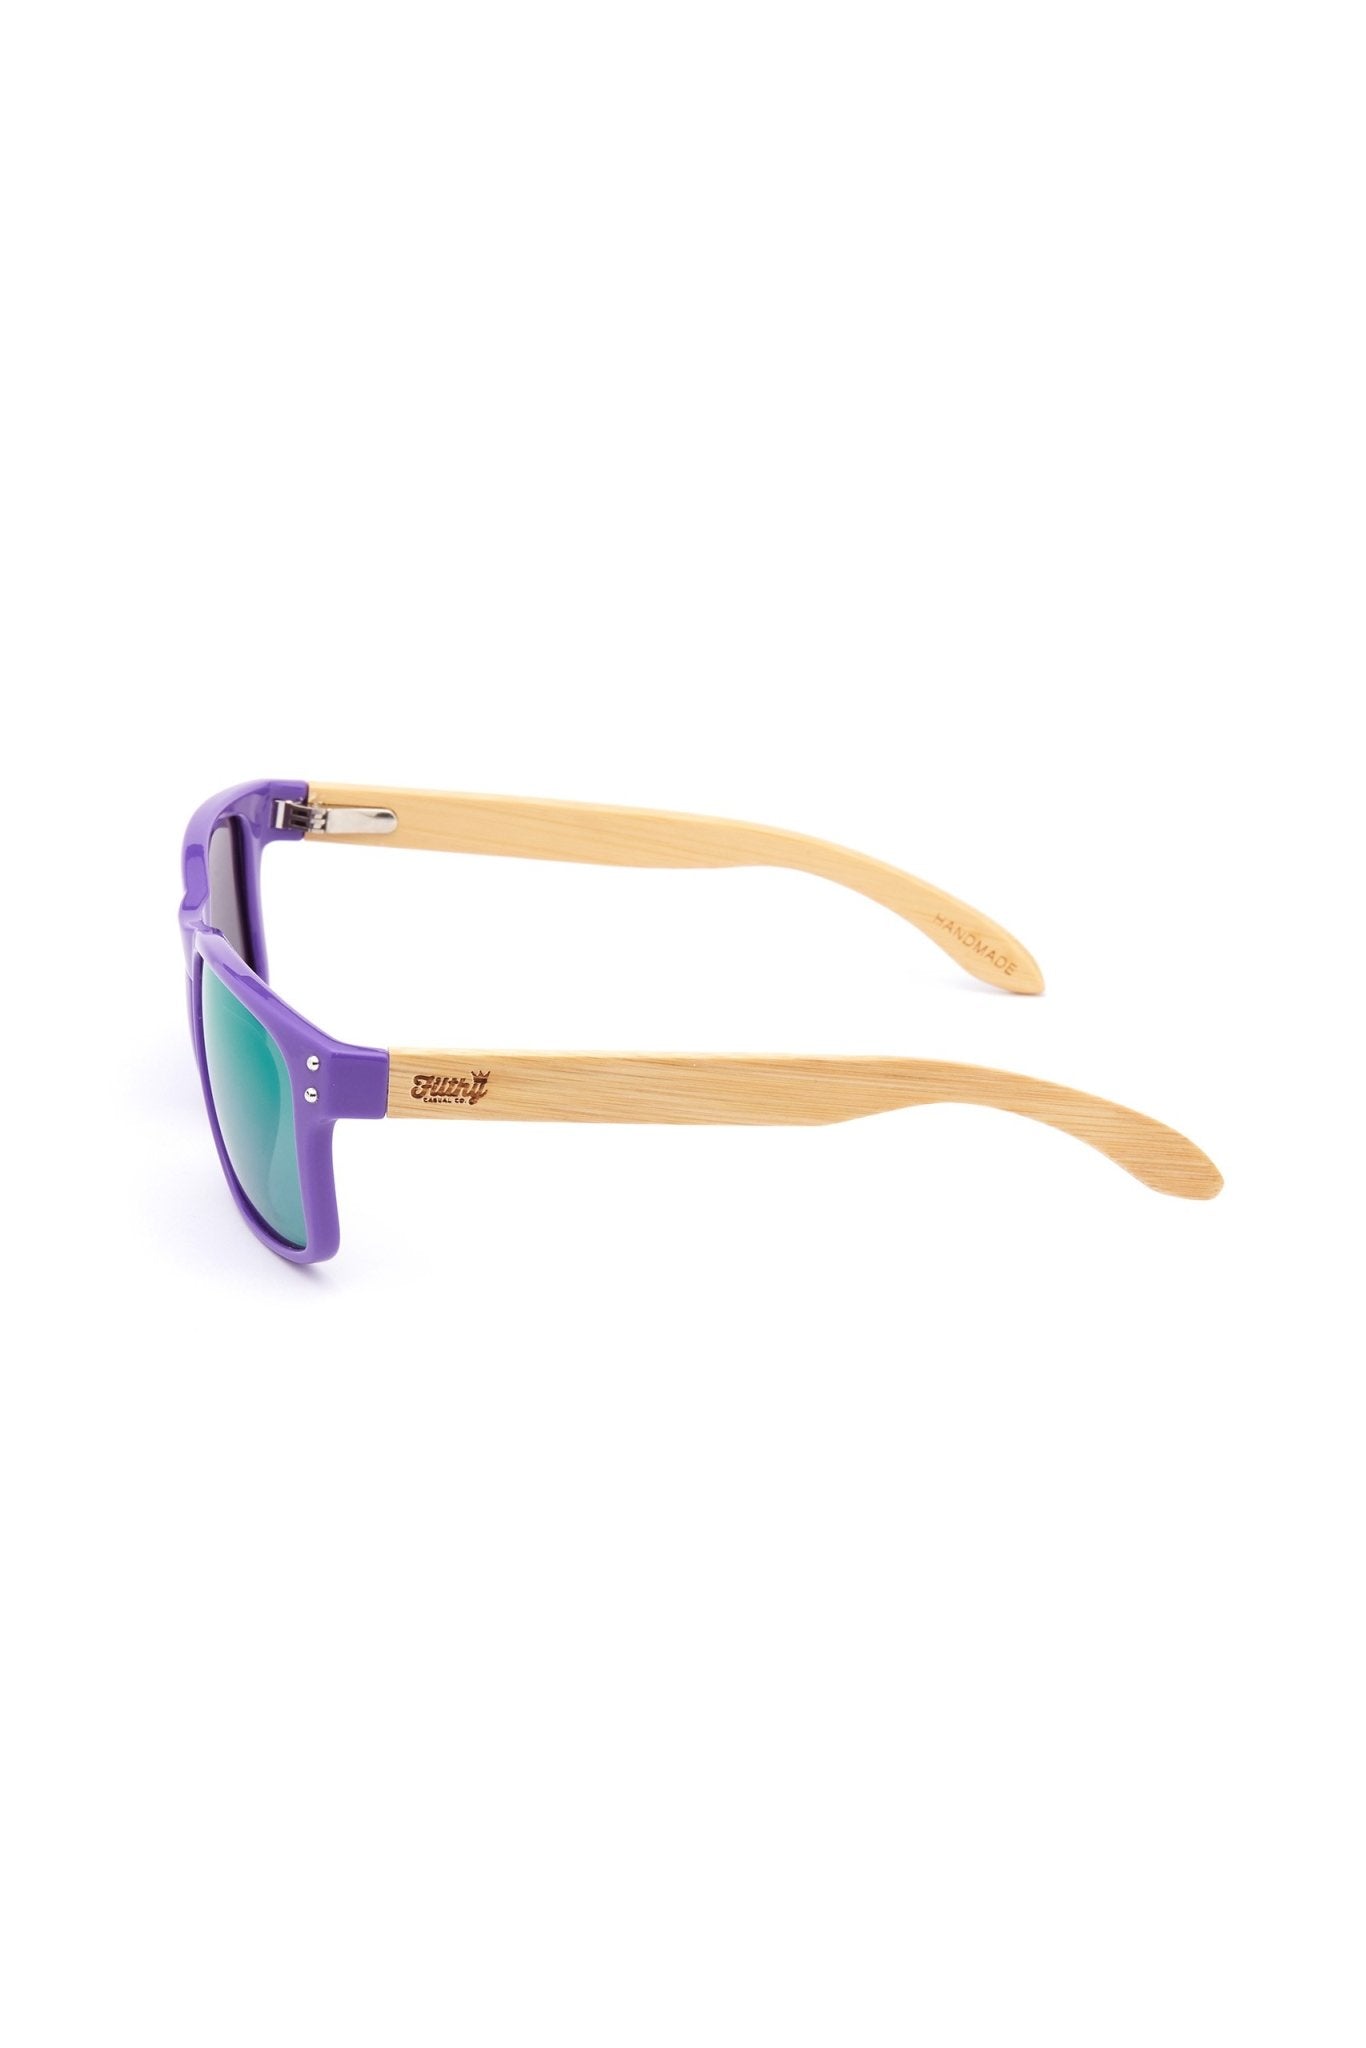 S1 Royalty Shades - Filthy Casual Co.